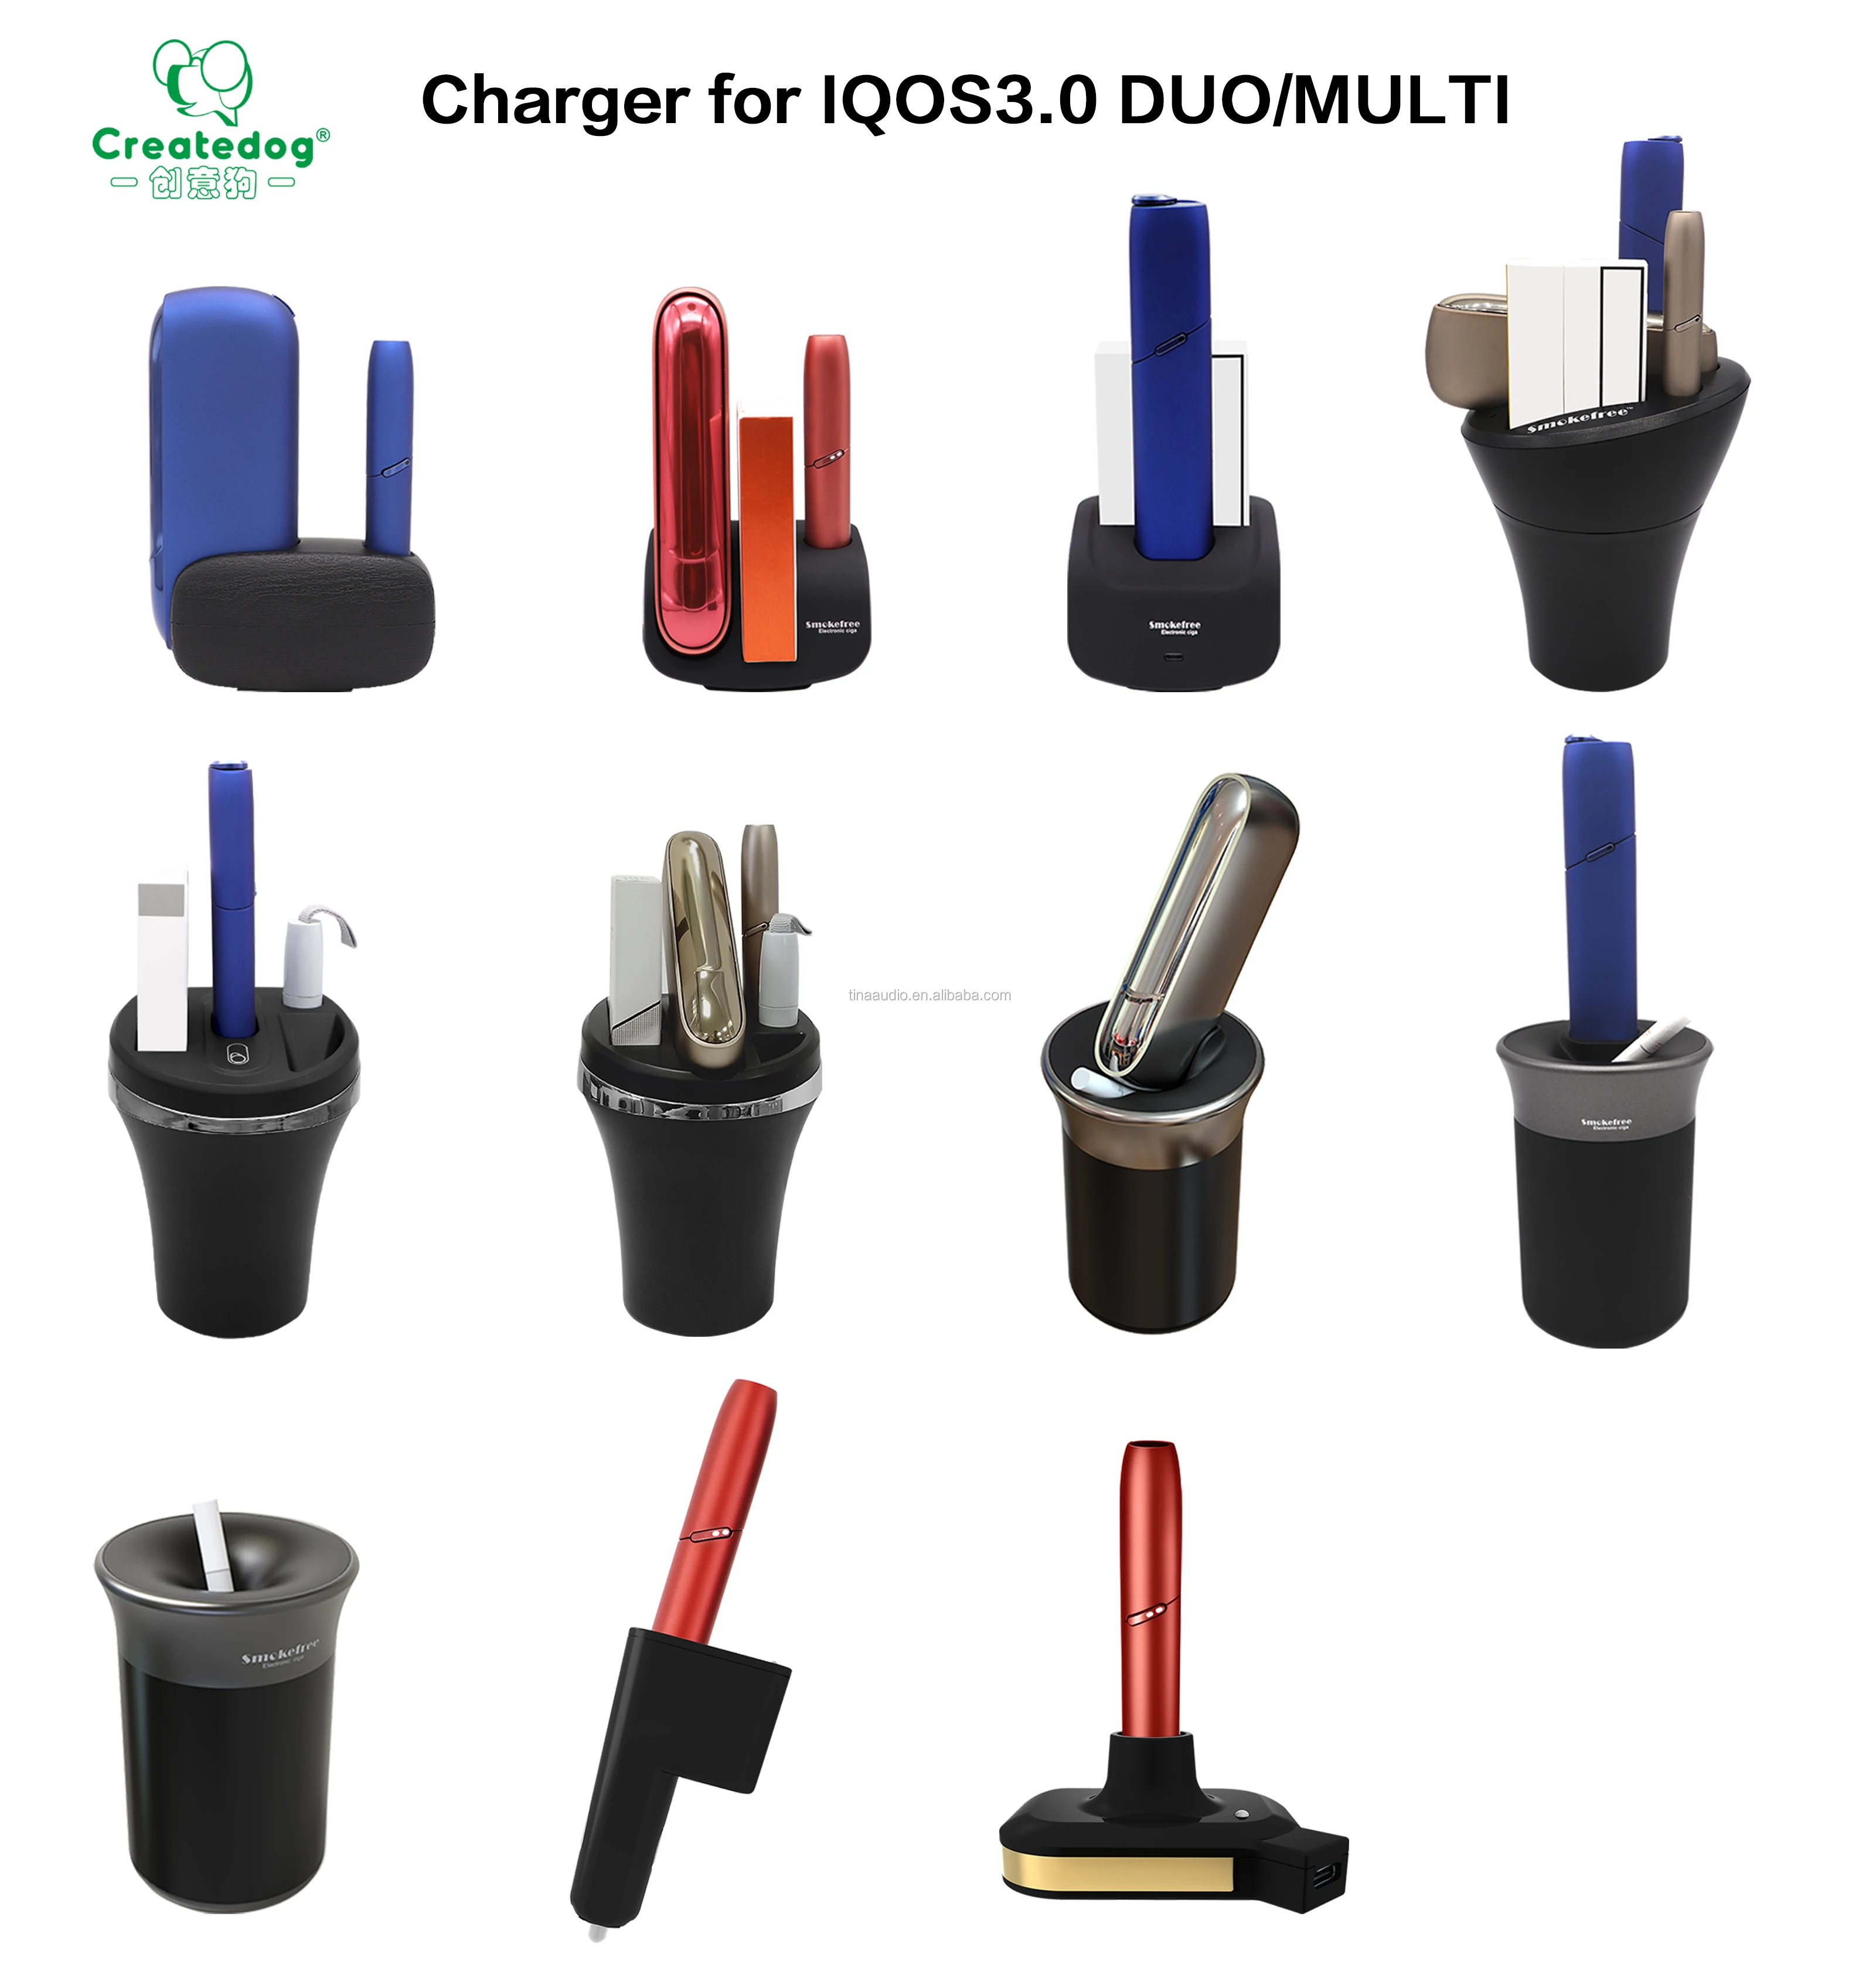 Charger for IQOS 3.0